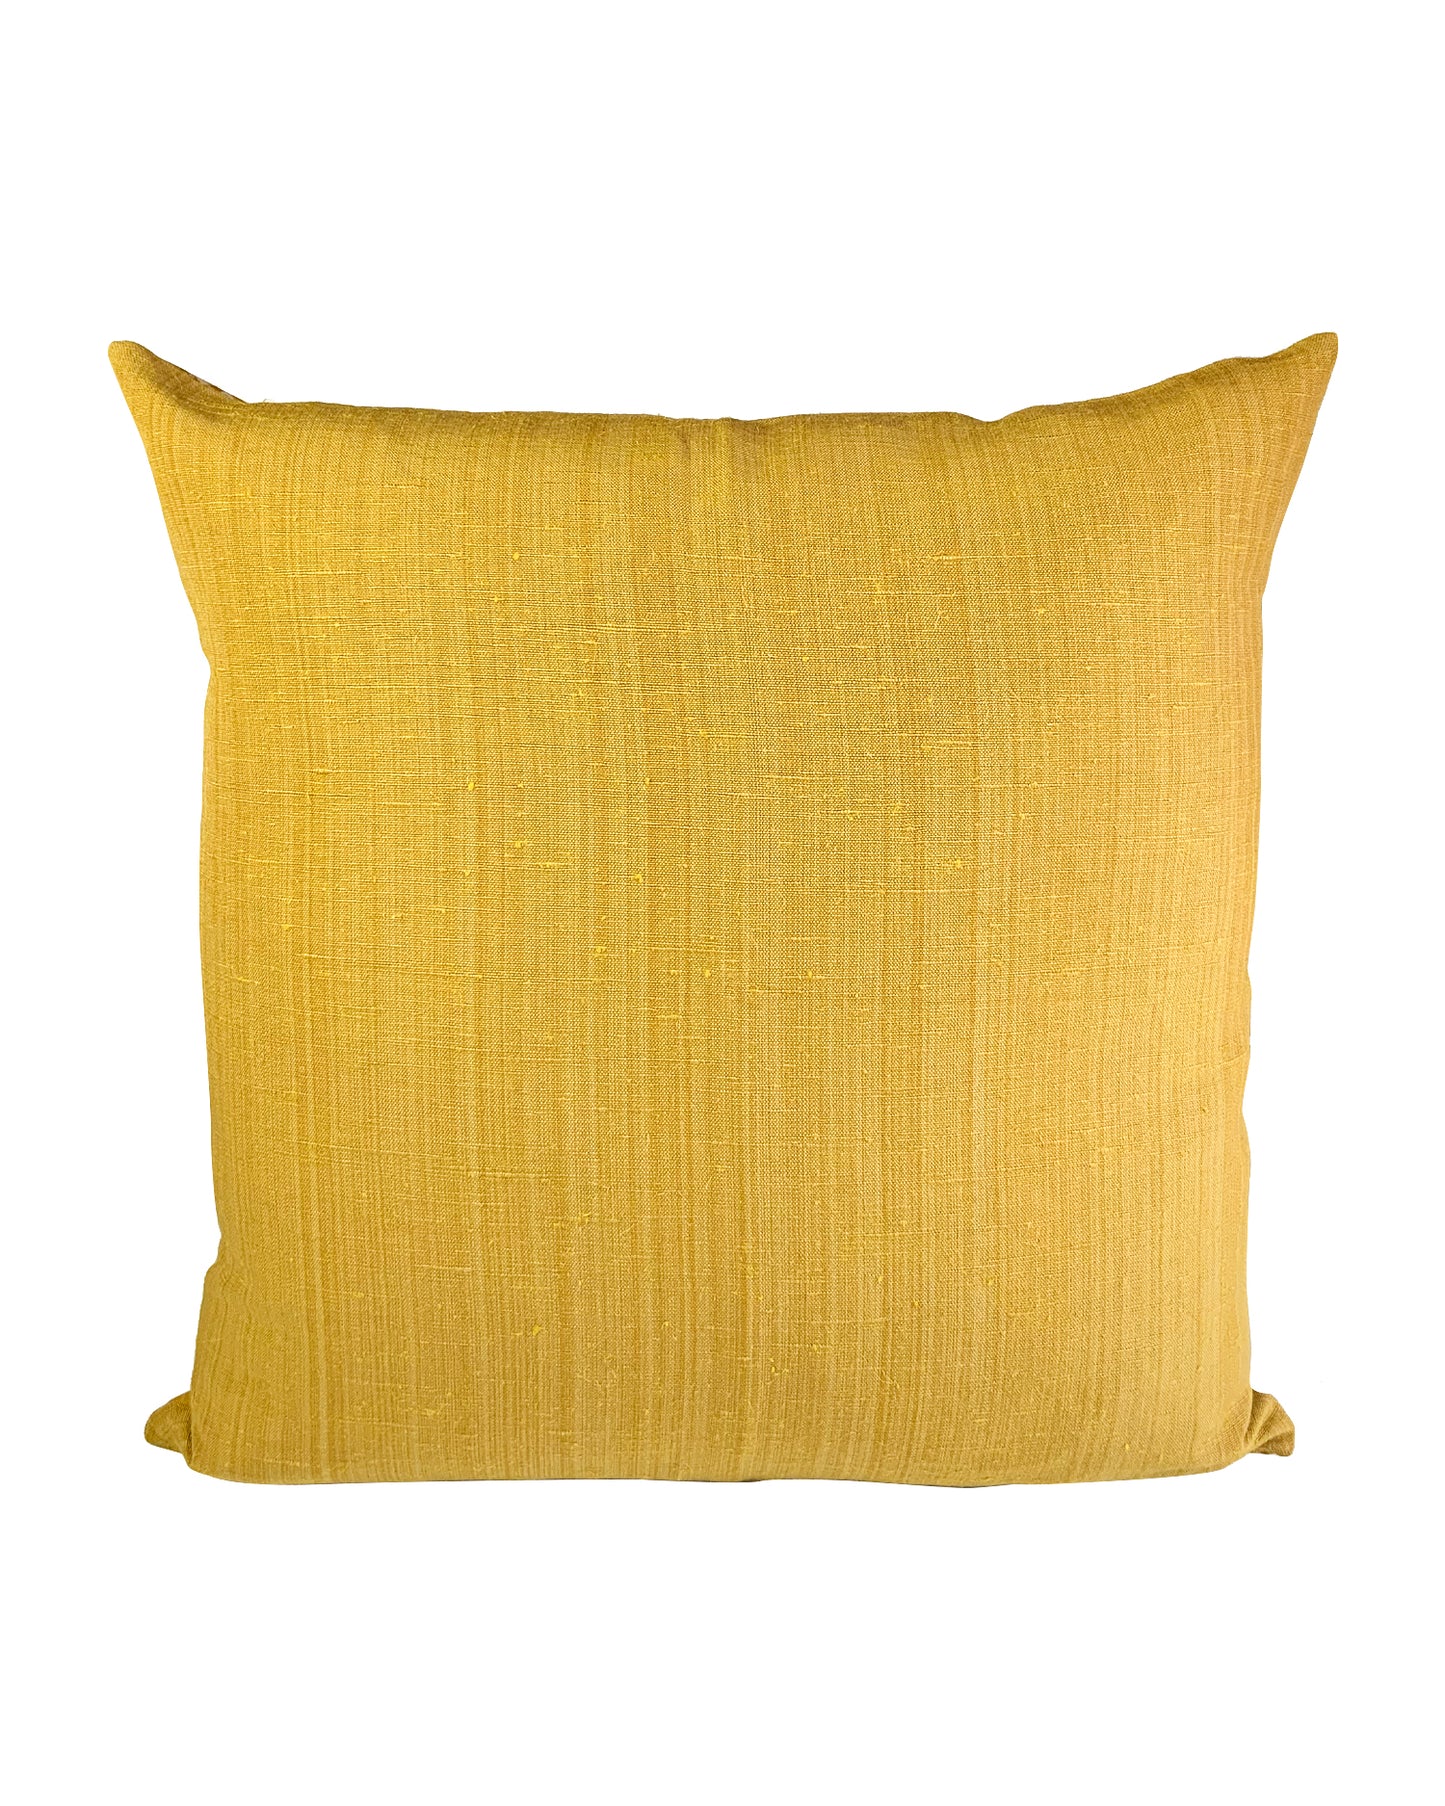 Cushion Cover in “Acorn” Print in yellow/ochre